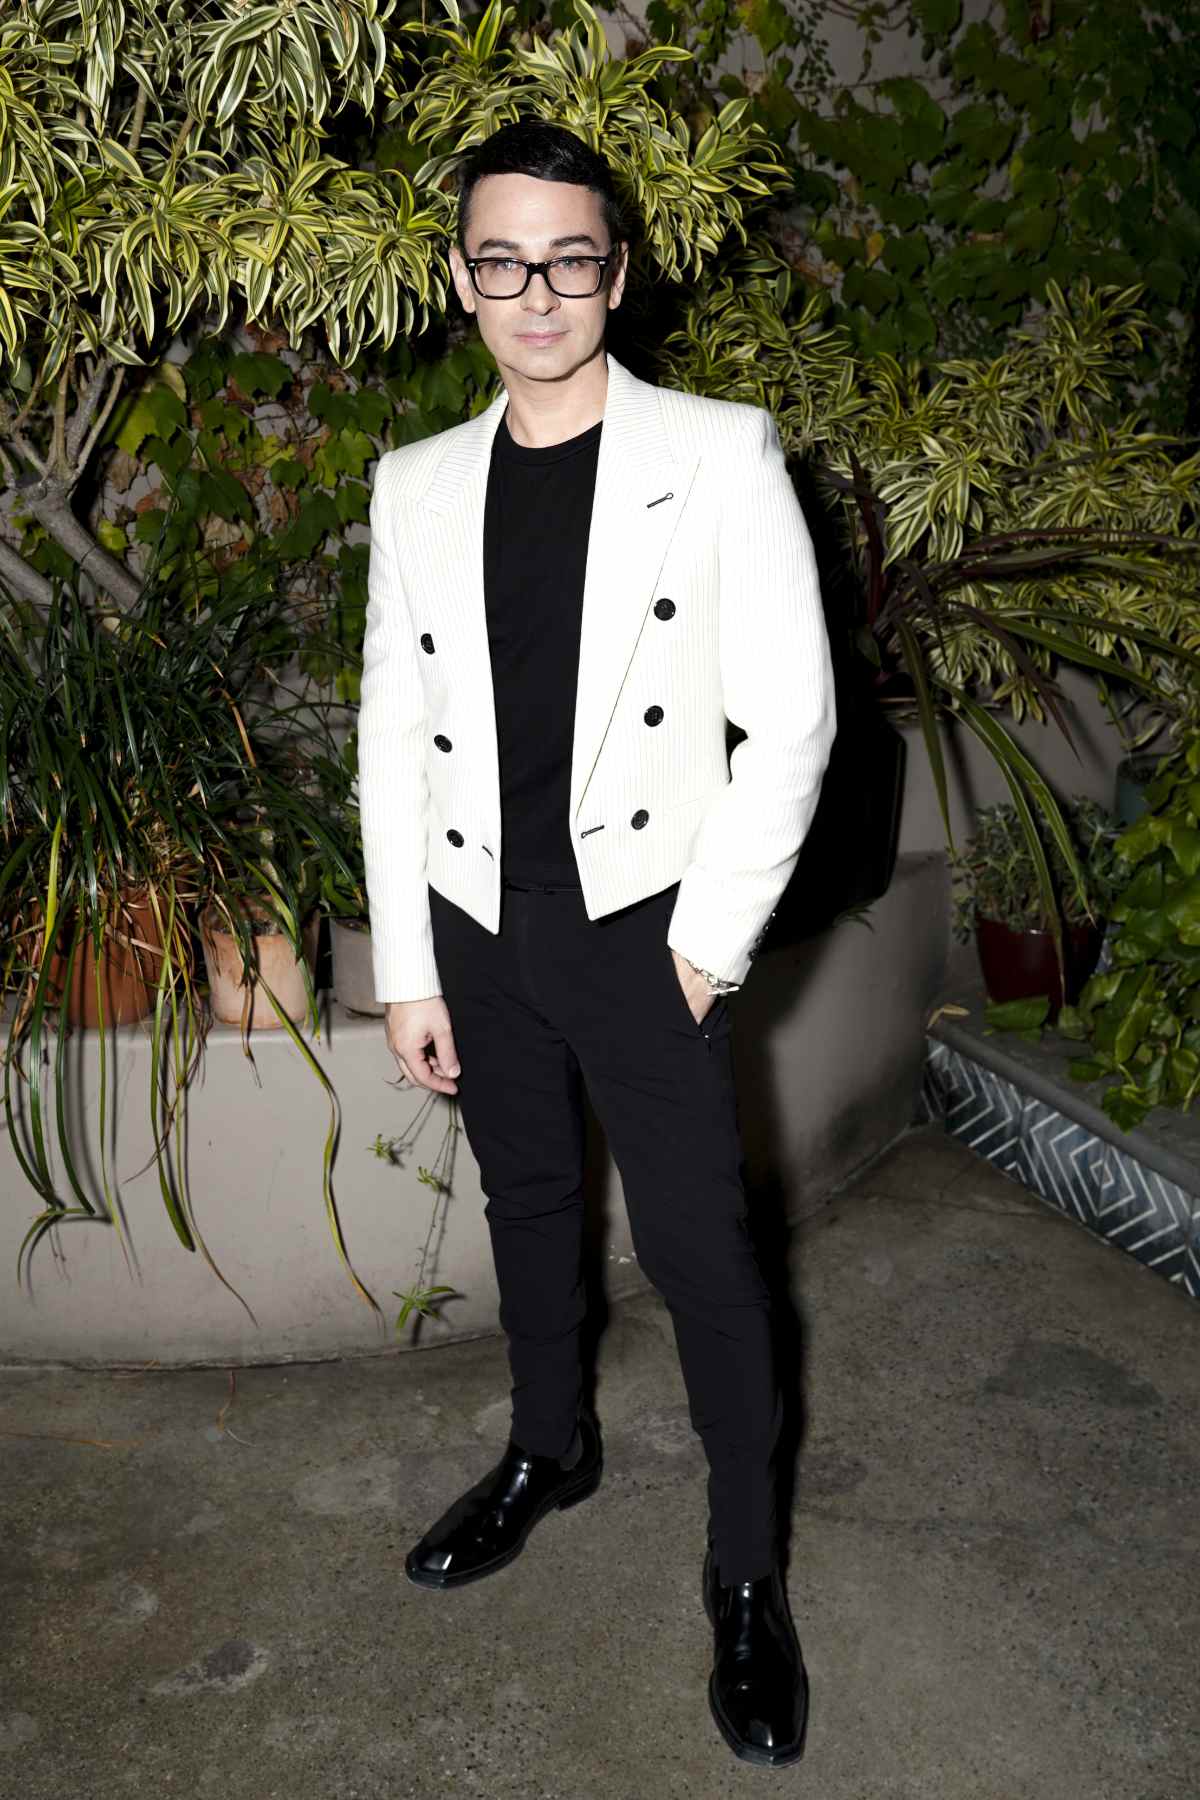 Christian Siriano Celebrates 15th Anniversary With Intimate Los Angeles Cocktail Fête